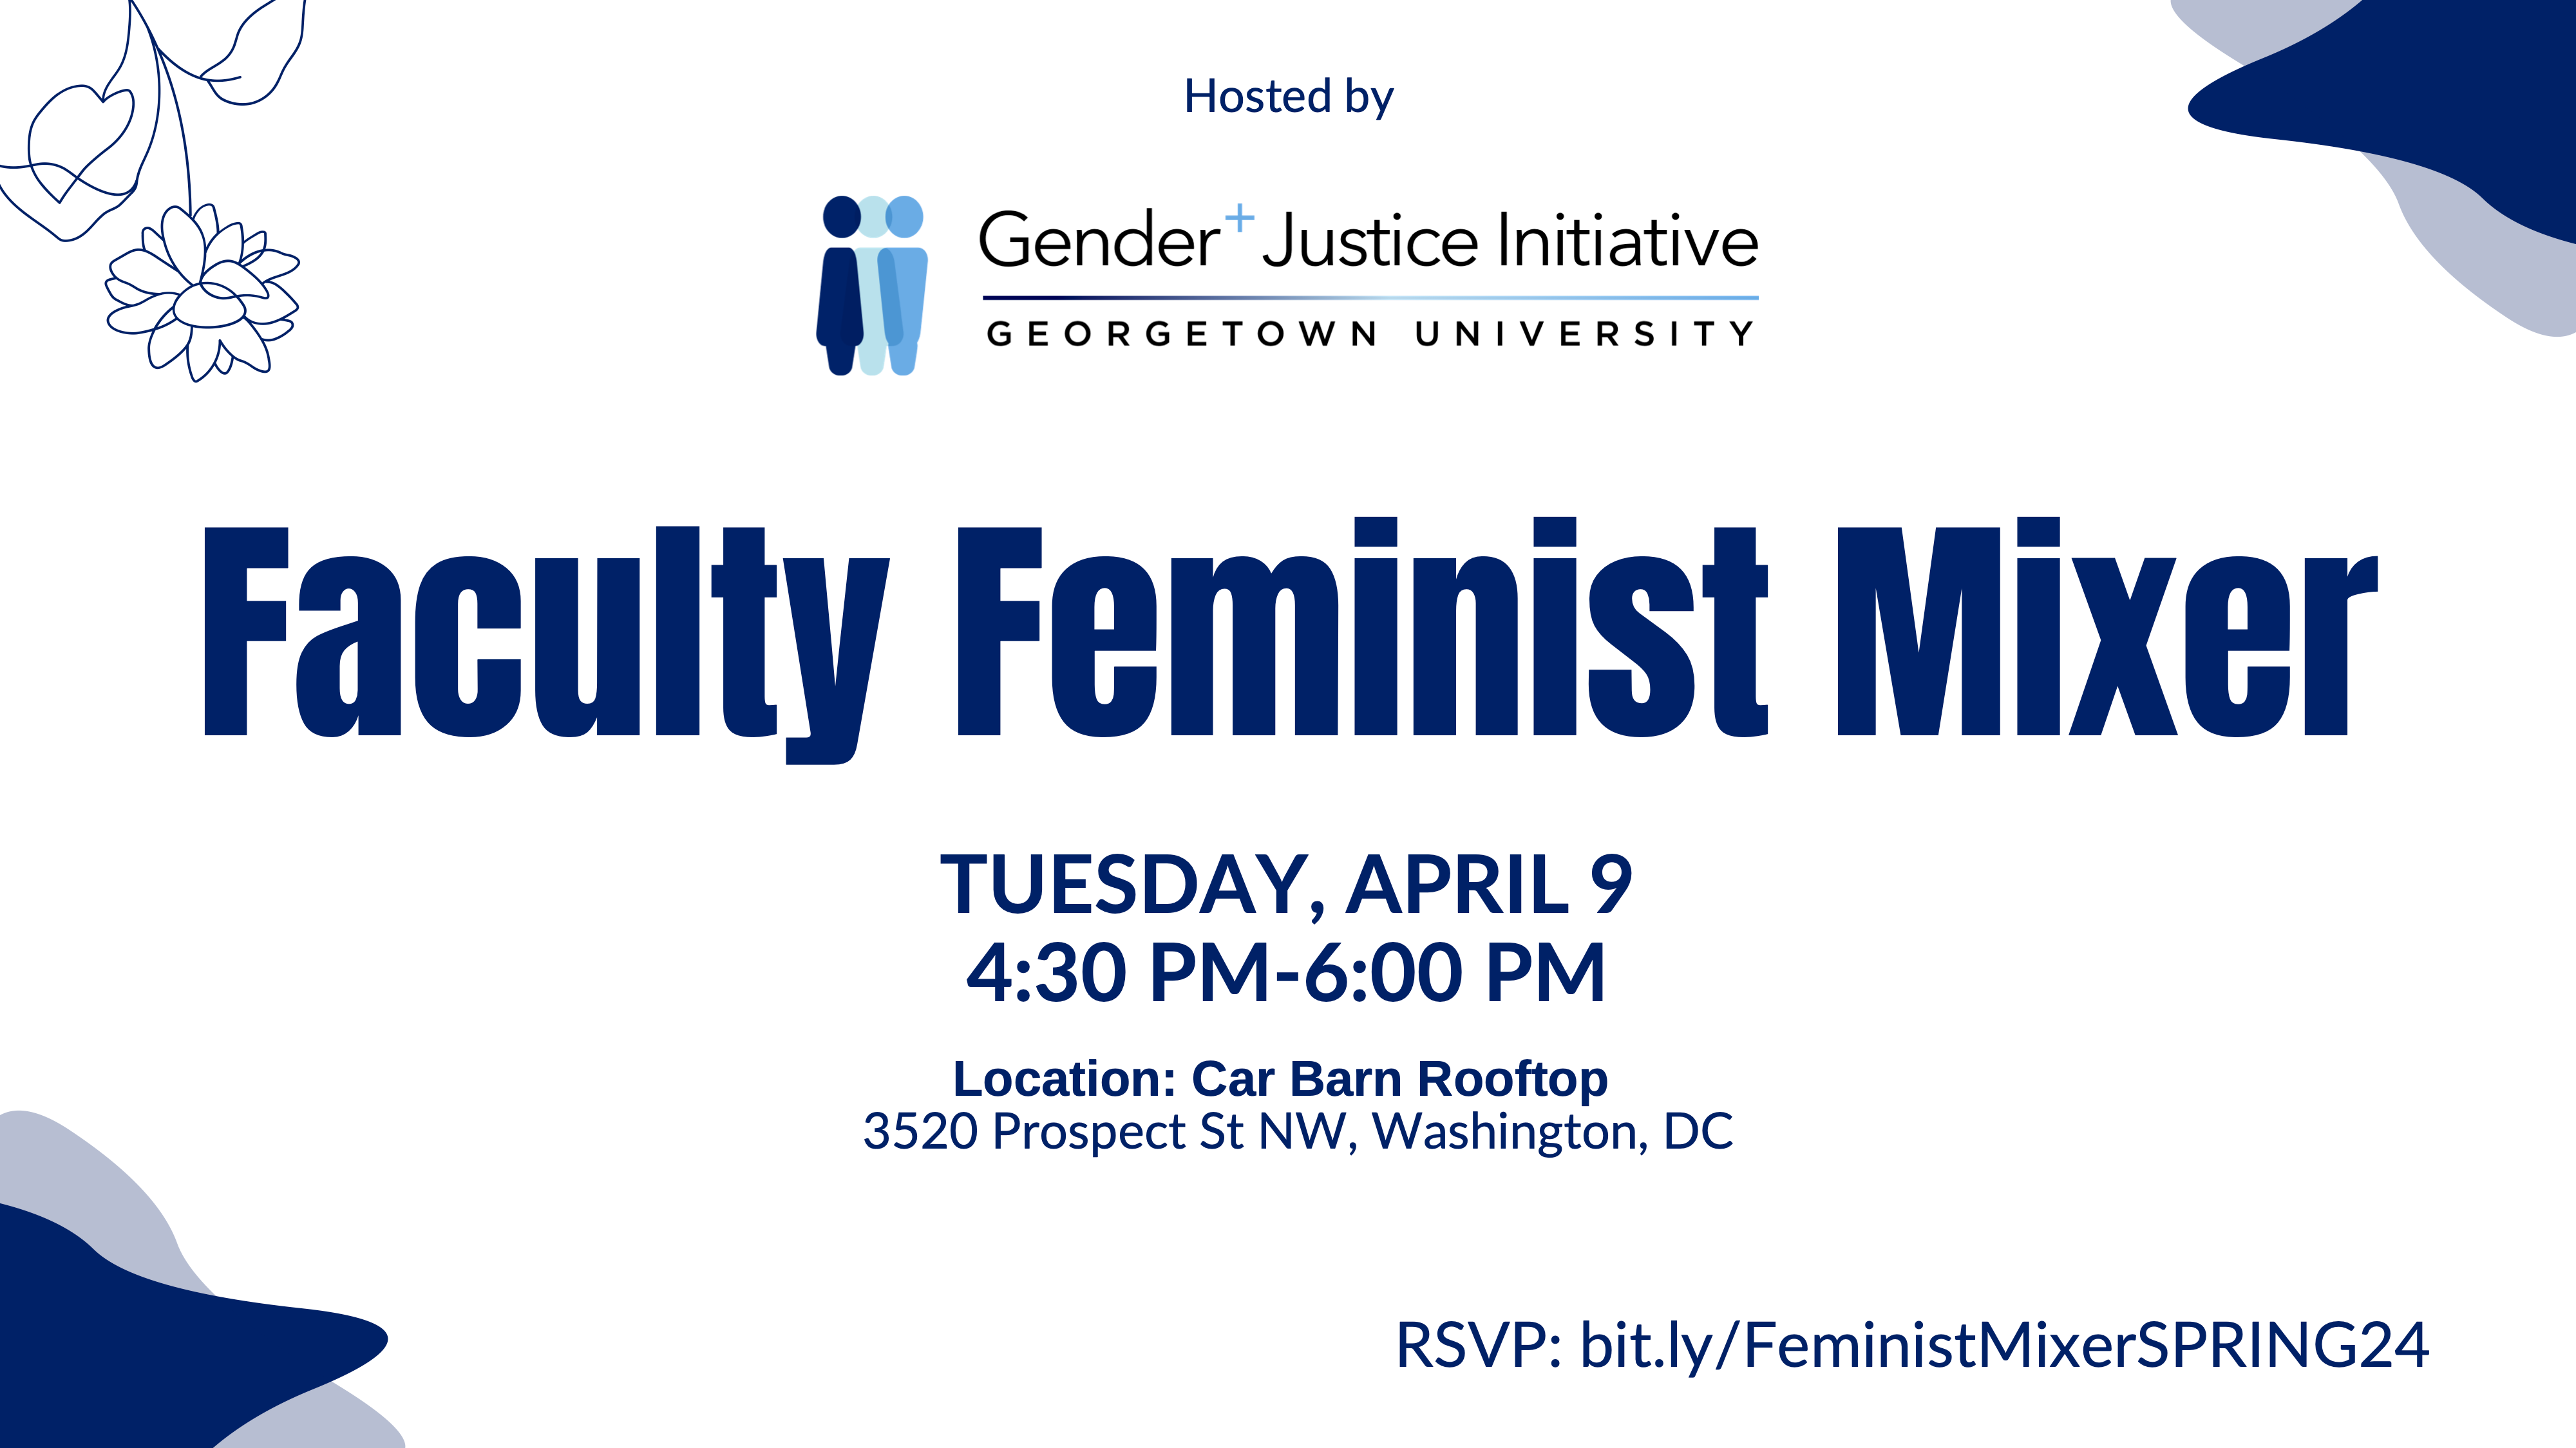 The image is a graphic design poster for a Feminist Mixer event hosted by the Gender Justice Initiative at Georgetown University. White background, blue and grey elements in corners, blue flower on top left corner. Text described the event, which is scheduled for Tuesday, April 9, from 4:30 PM to 6:00 PM at the Car Barn Rooftop in Washington, DC. The poster includes details about the faculty and RSVP information.